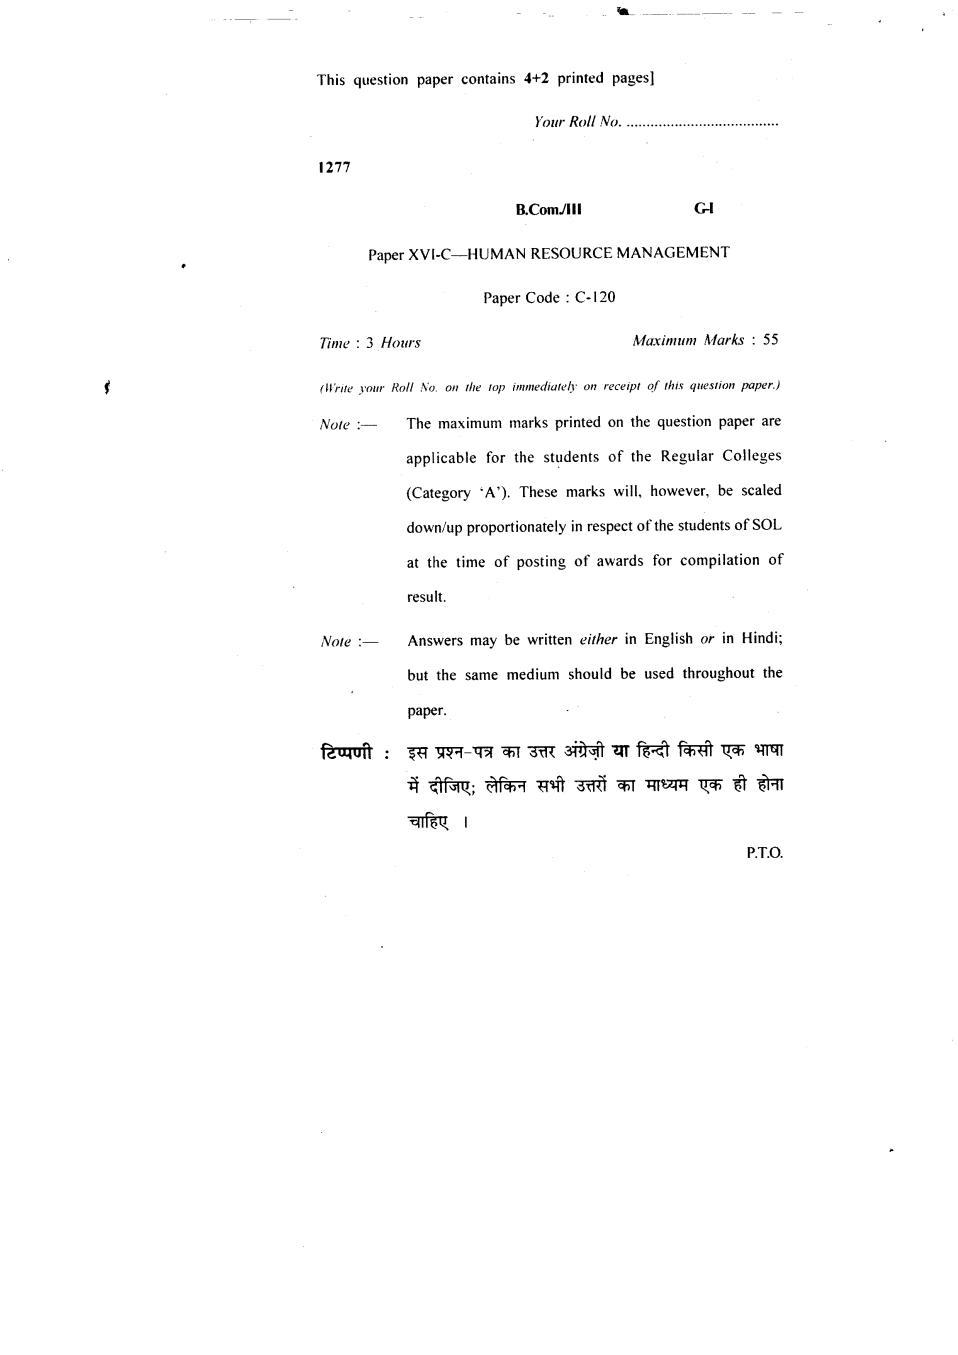 DU SOL B.Com Question Paper 3rd Year 2018 Human Resource Management - Page 1